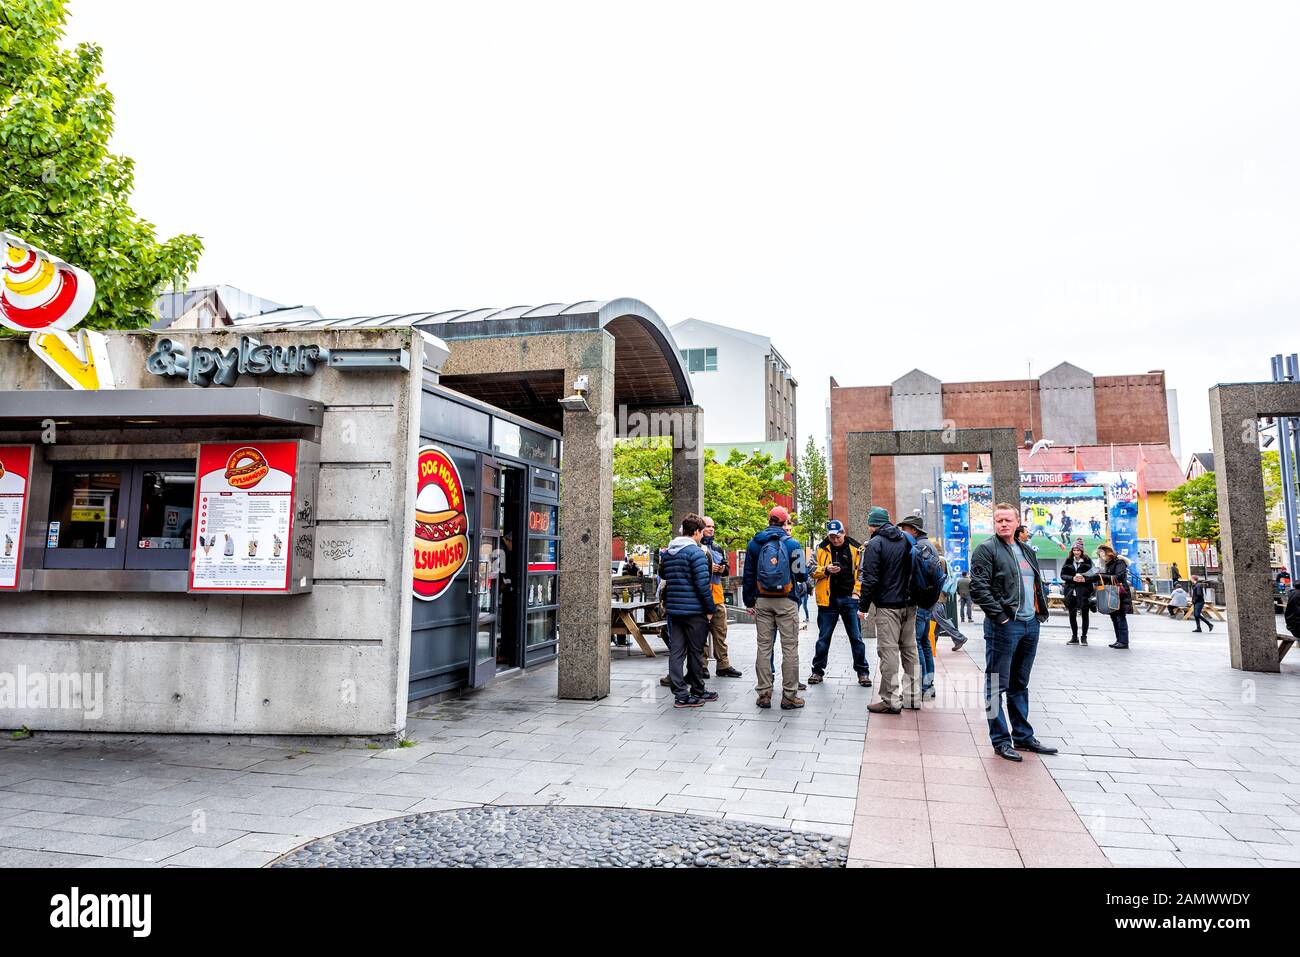 Reykjavik, Iceland - June 19, 2018: Ingolfur Ingolfstorg Square with signs for HM Torgid people watching world cup FIFA and restaurant Stock Photo